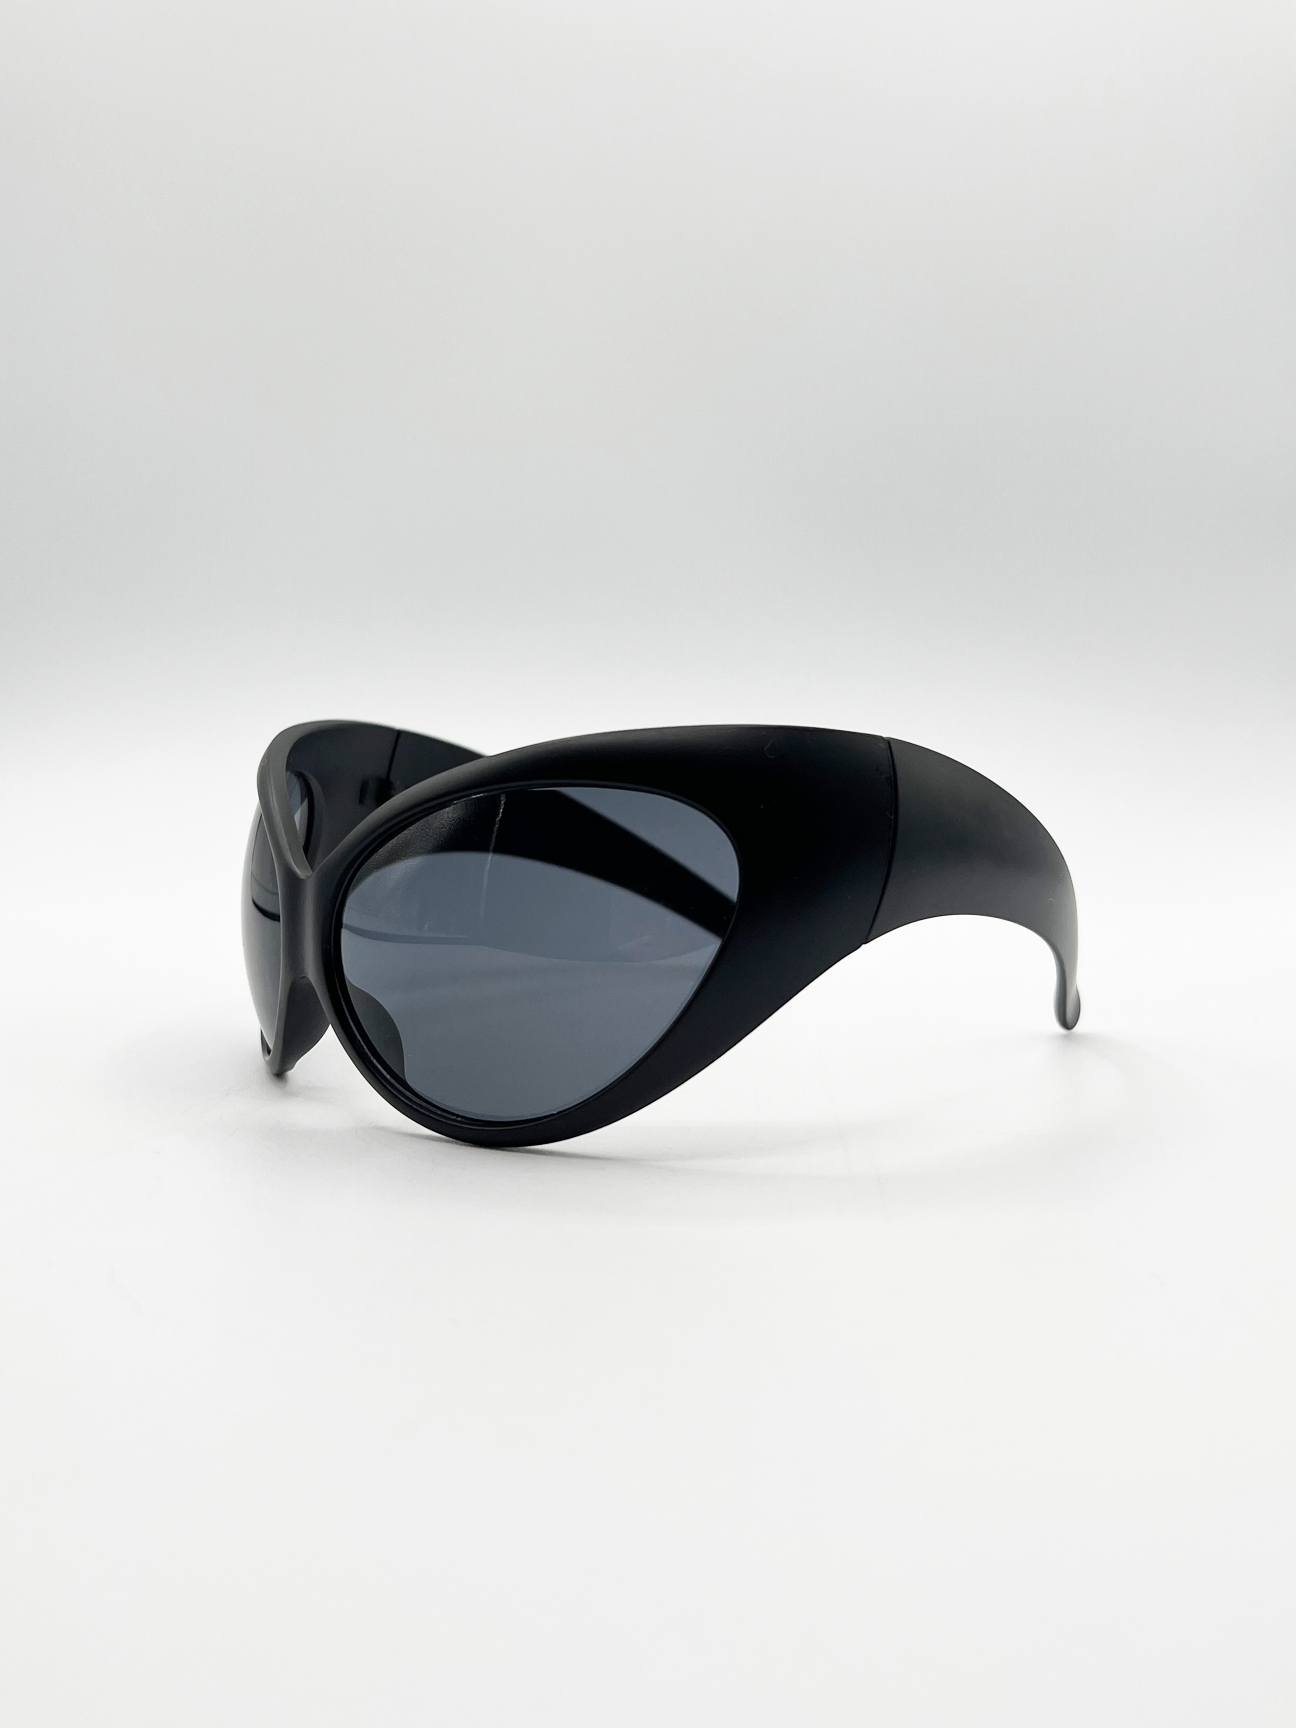 Ultra Curved Wrap Around Sunglasses in Black